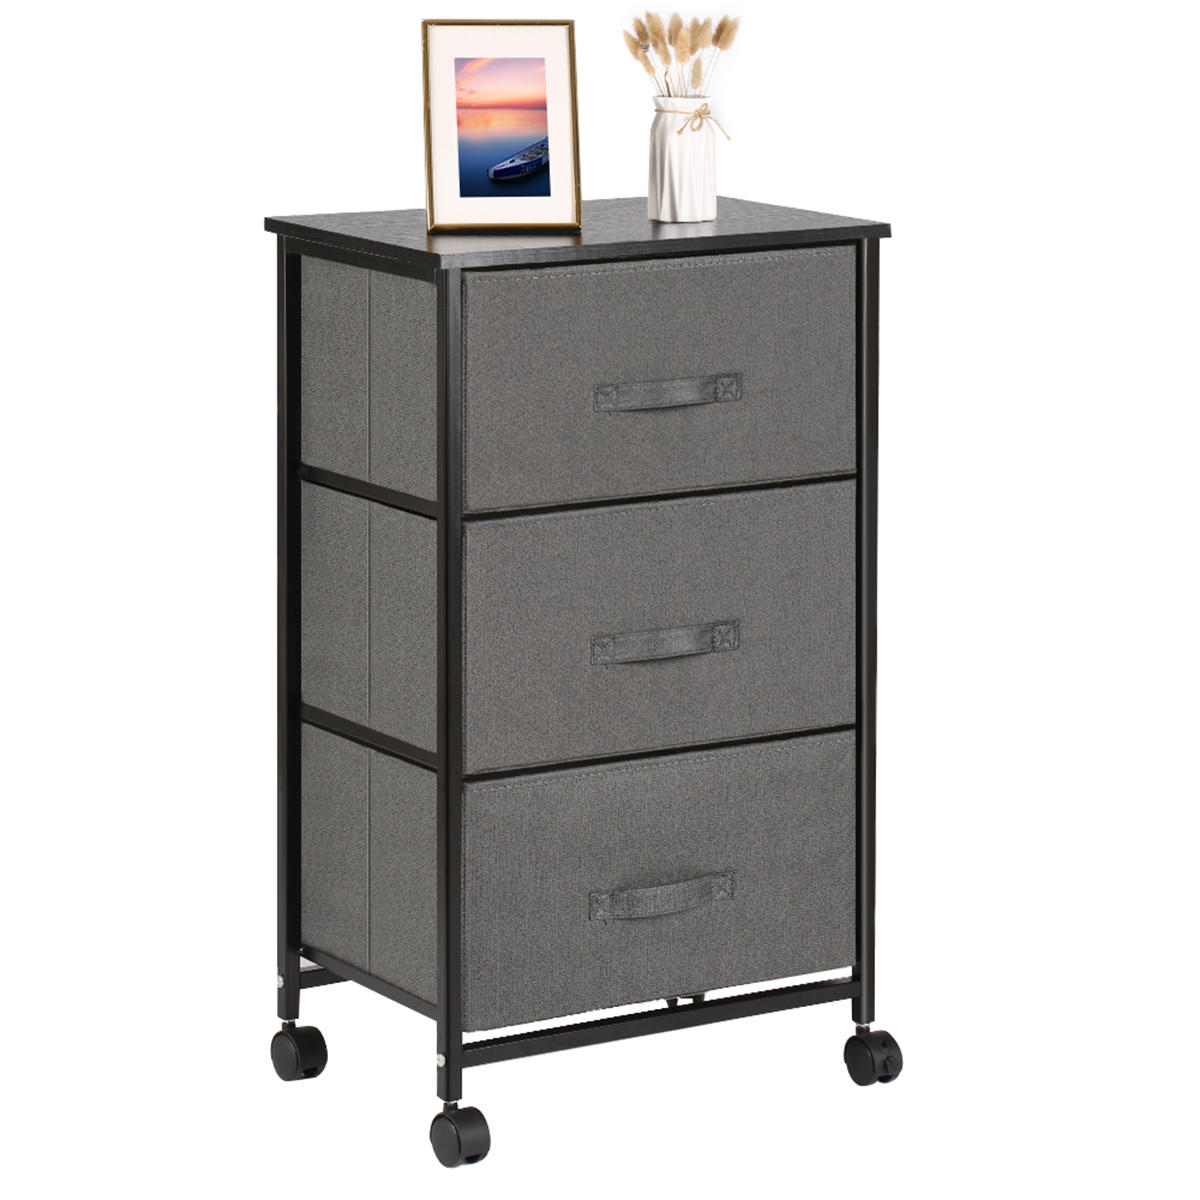 3 Drawers Fabric Storage Cabinet With 360 Degrees Rotating Wheels